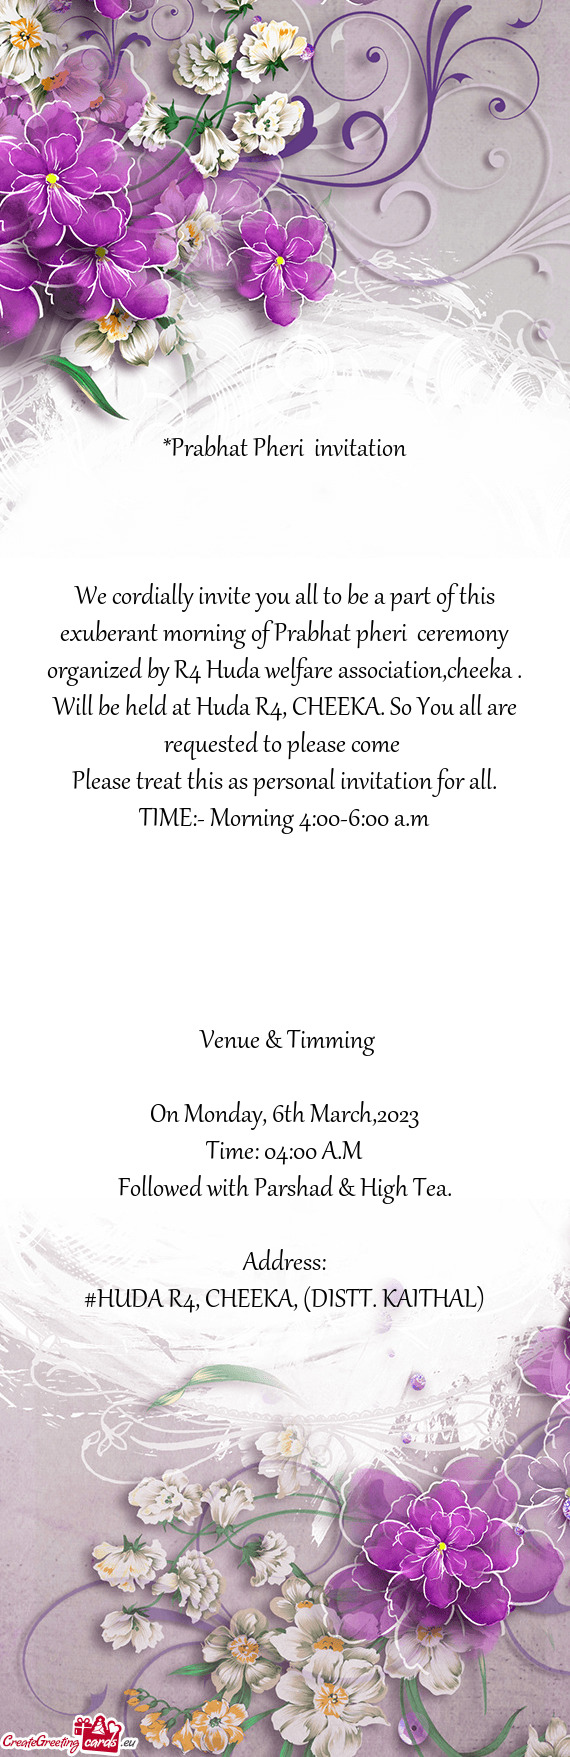 We cordially invite you all to be a part of this exuberant morning of Prabhat pheri ceremony organi